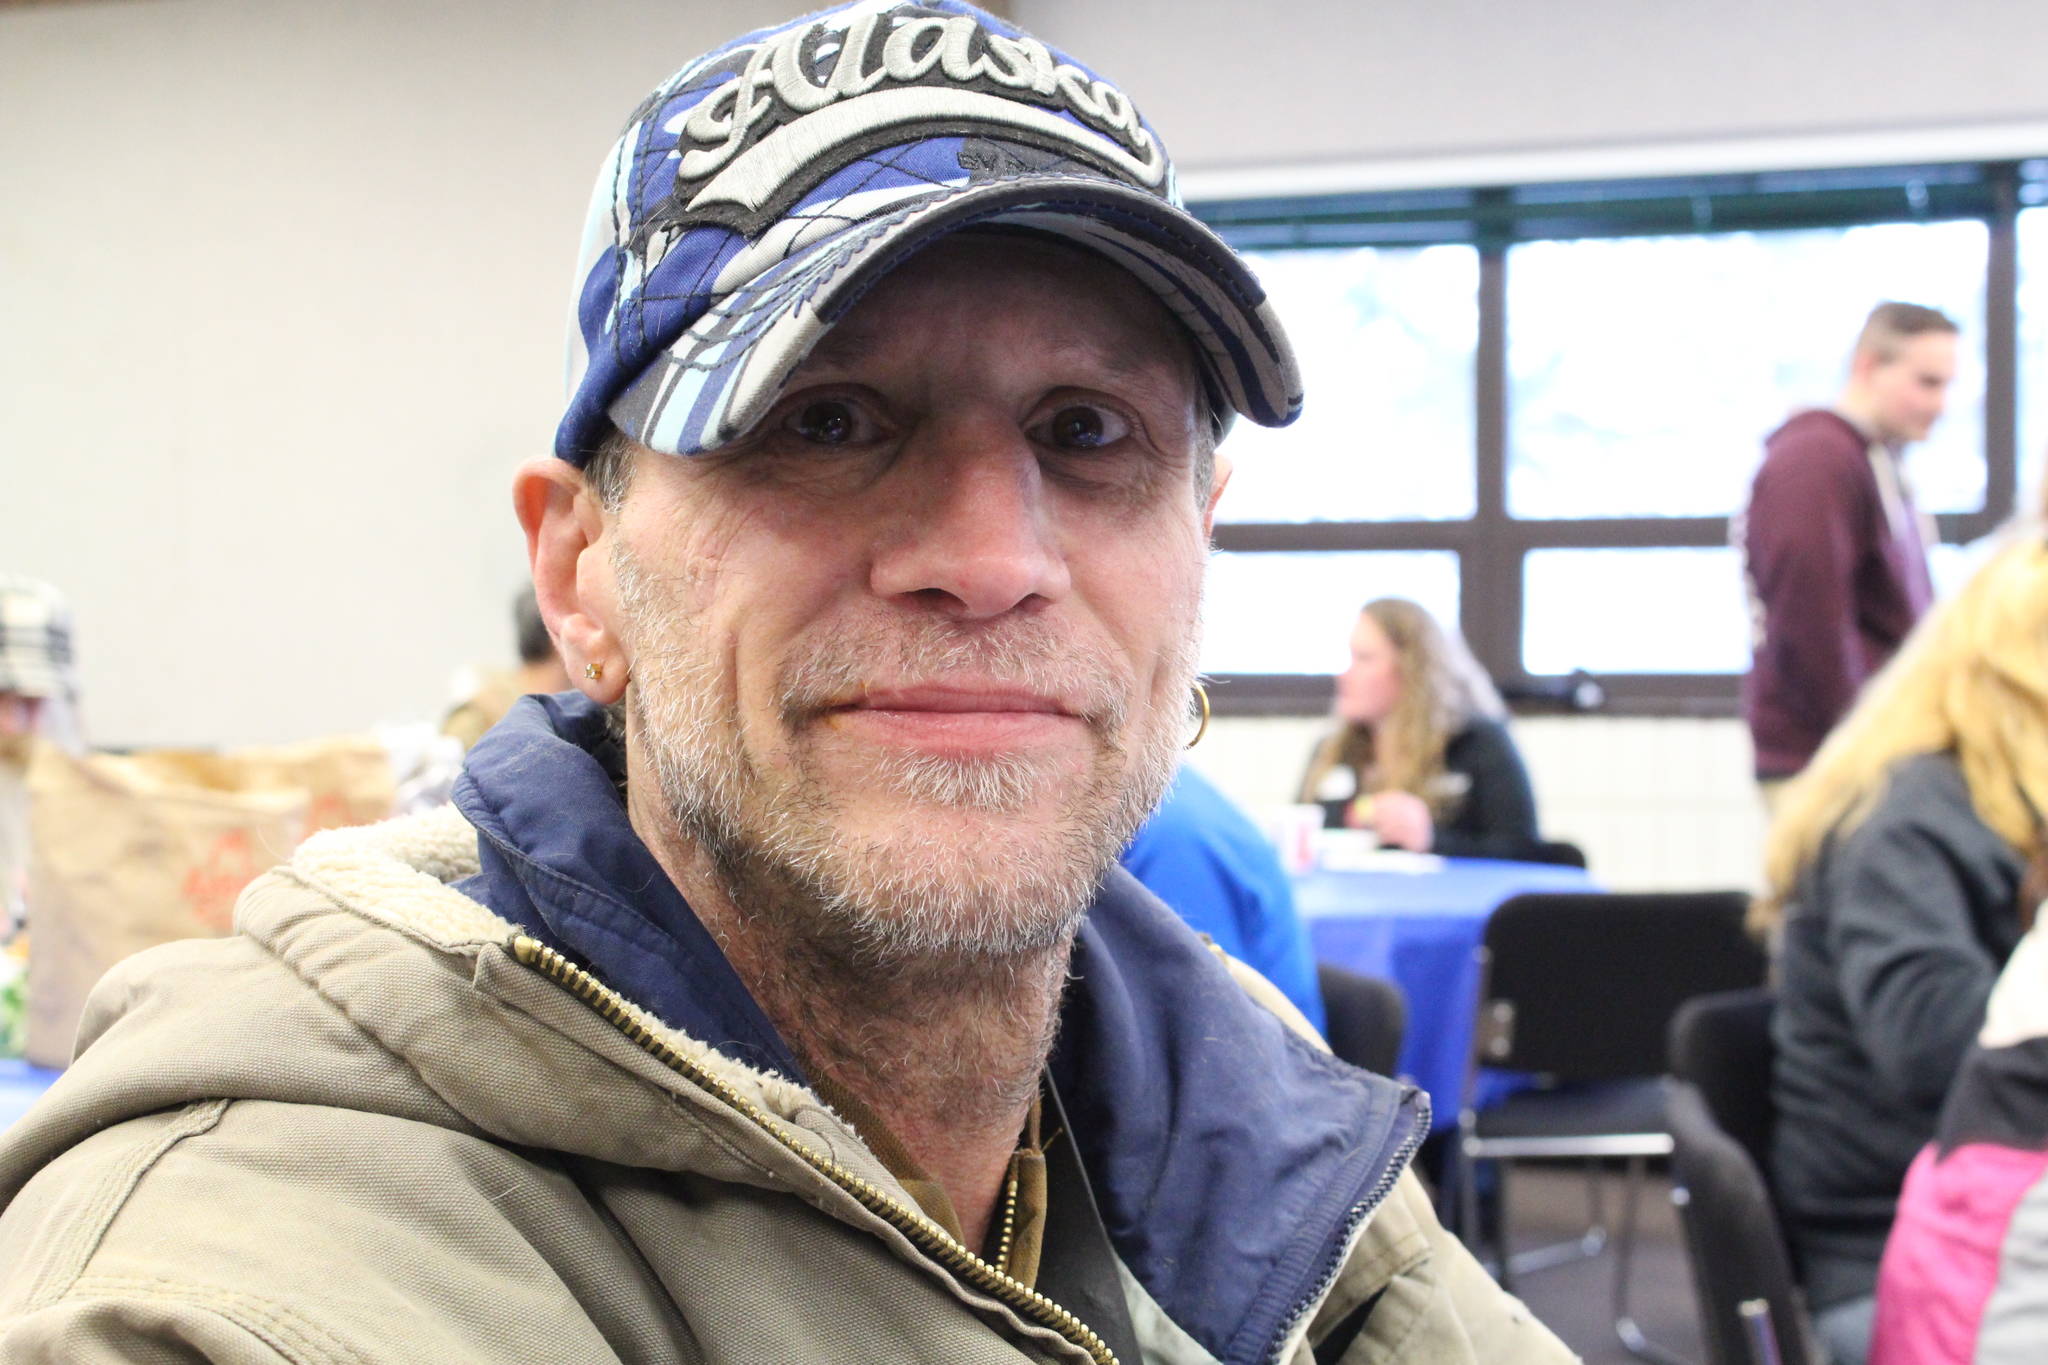 Scott Morris smiles during the 2020 Project Homeless Connect event at the Soldotna Regional Sports Complex in Soldotna, Alaska, on Jan. 29, 2020. (Photo by Brian Mazurek/Peninsula Clarion)